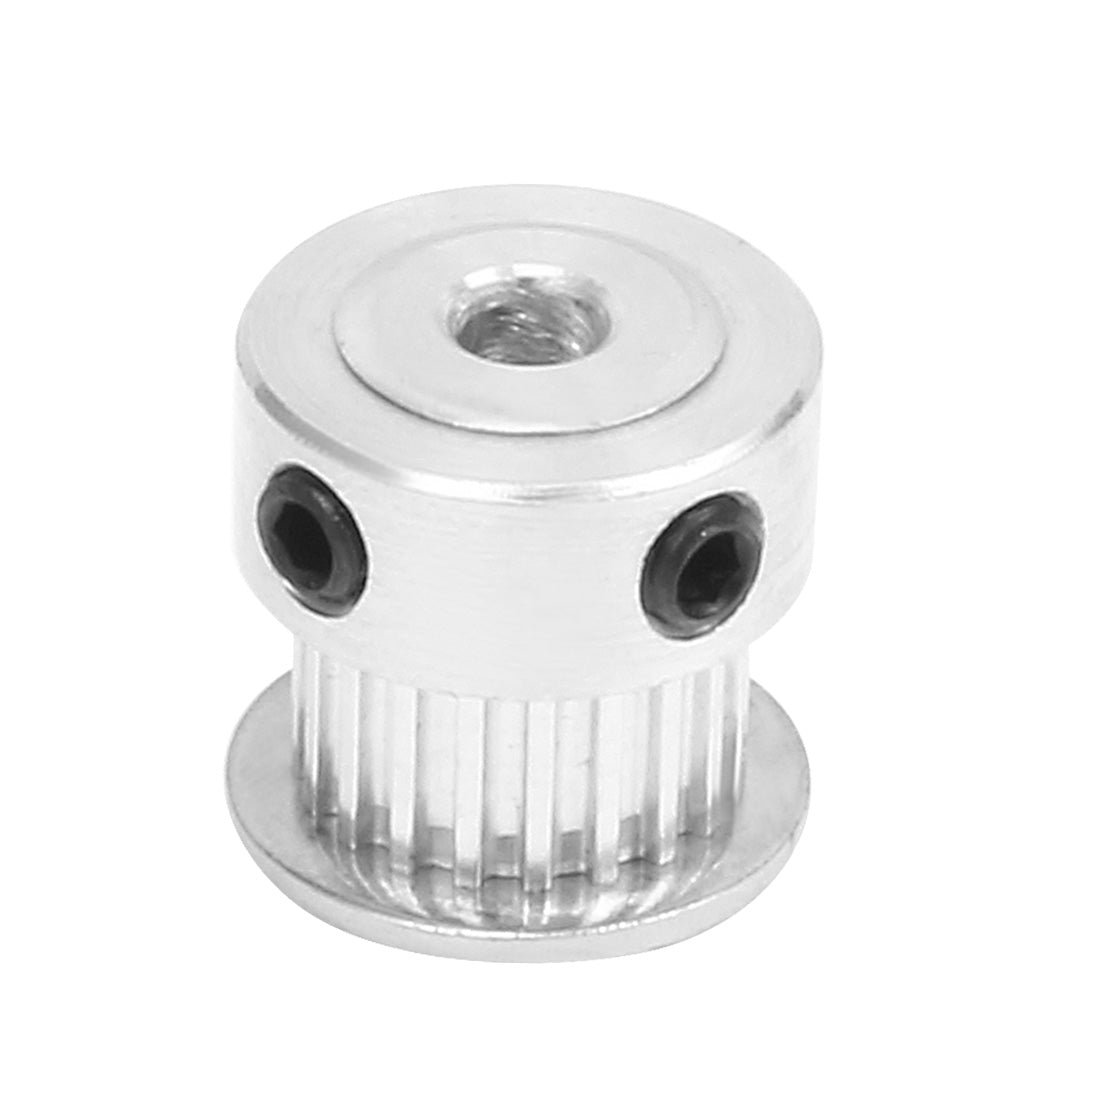 uxcell Uxcell Aluminum M-X-L 20 Teeth 4mm Bore Timing Belt Idler Pulley Flange Synchronous Wheel 6mm Belt for 3D Printer CNC